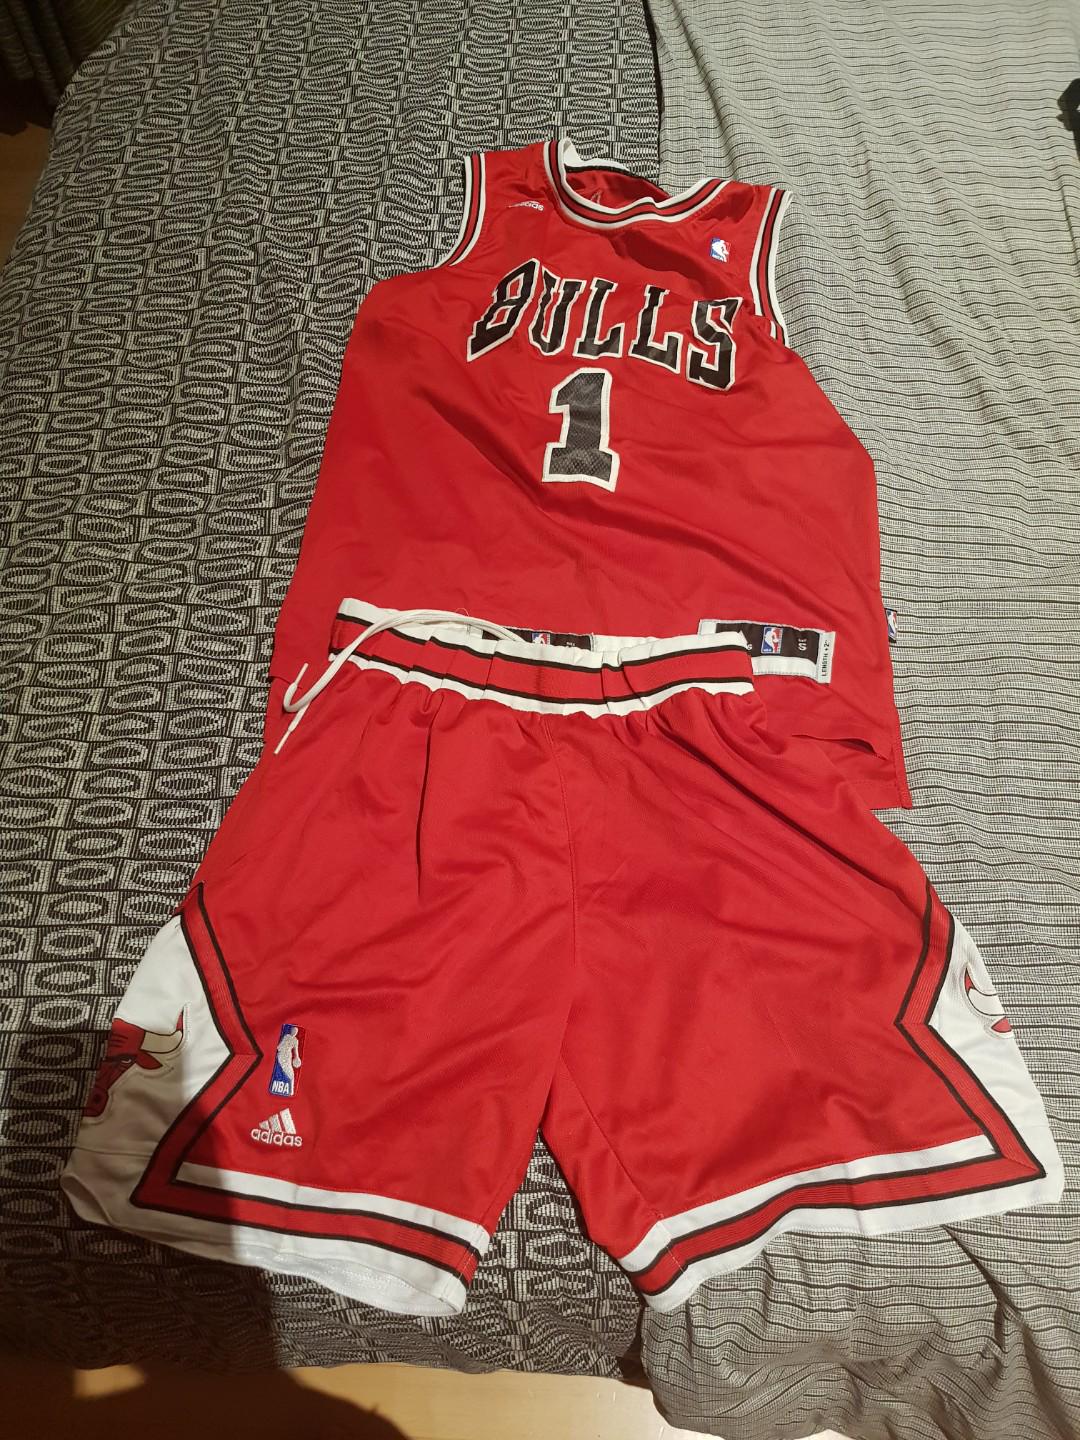 derrick rose jersey and shorts